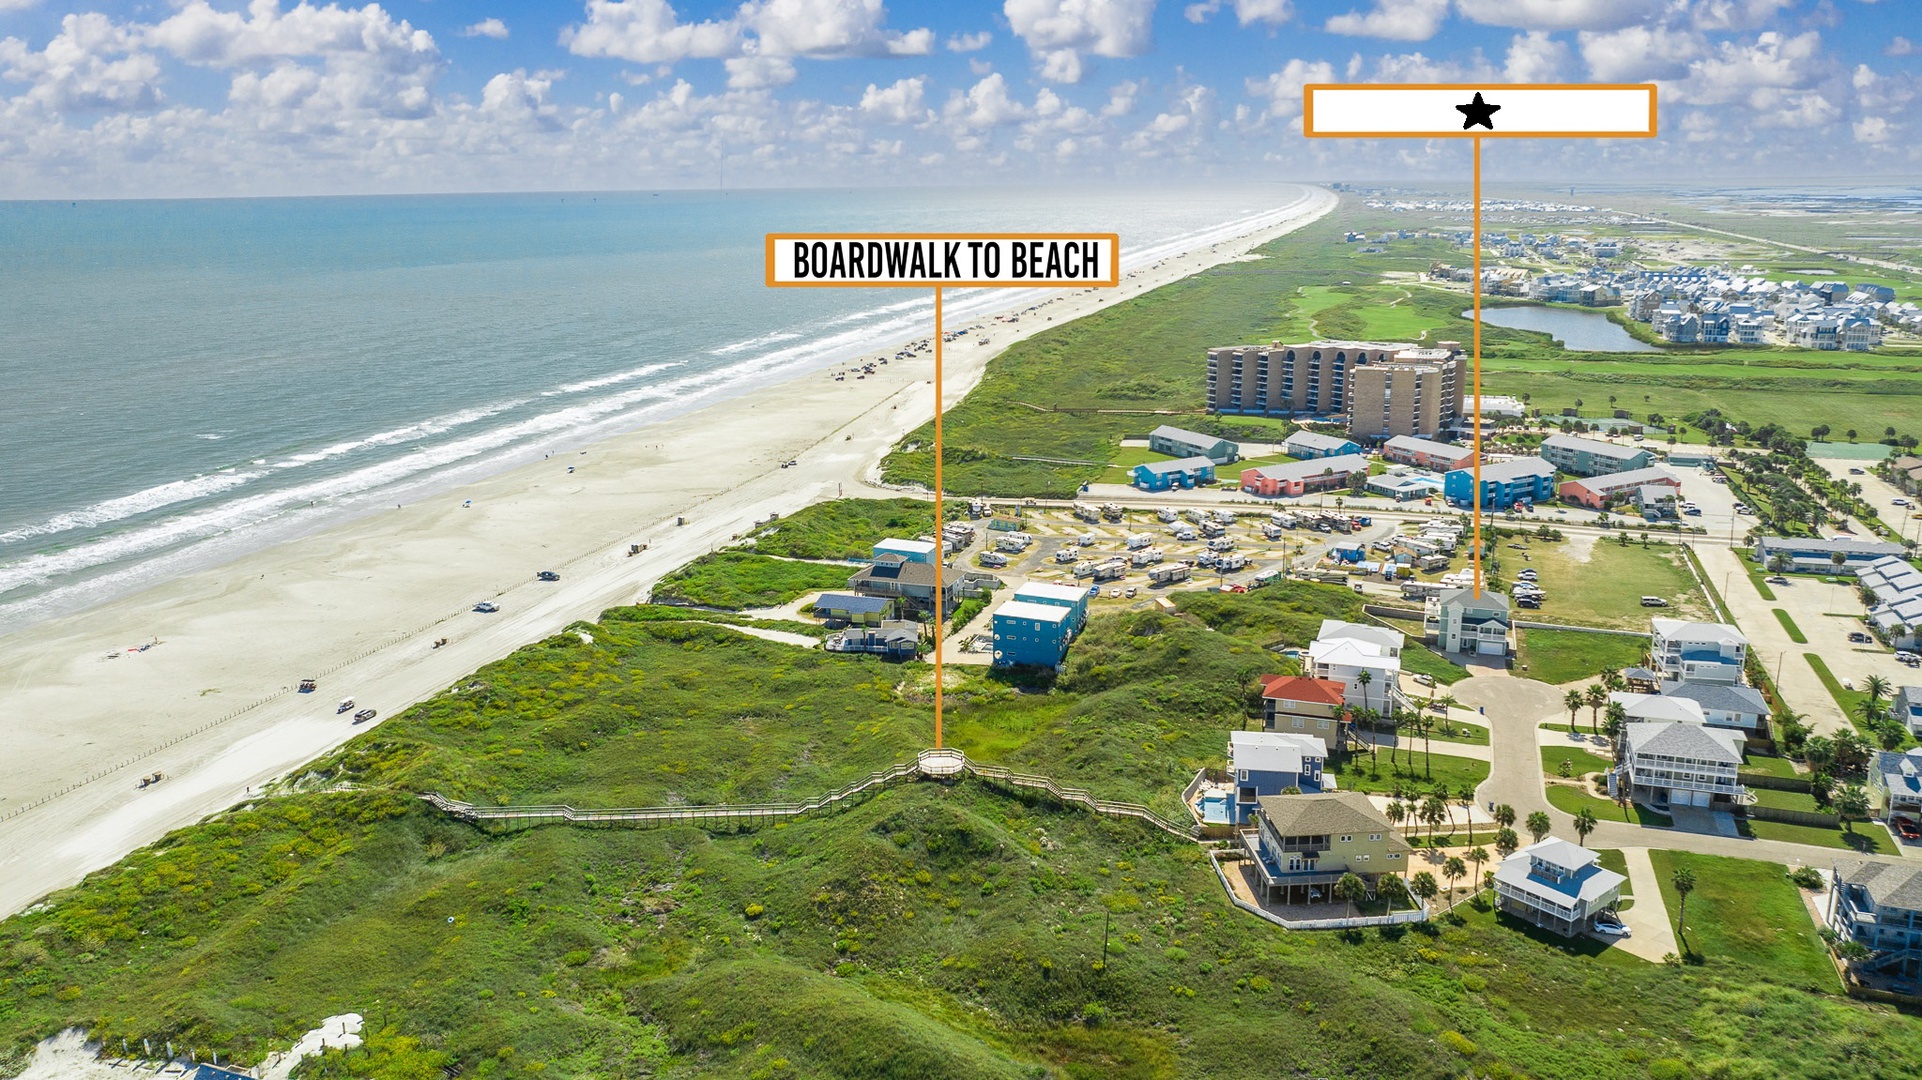 Enjoy being mere steps away from the beach during your visit to Port Aransas